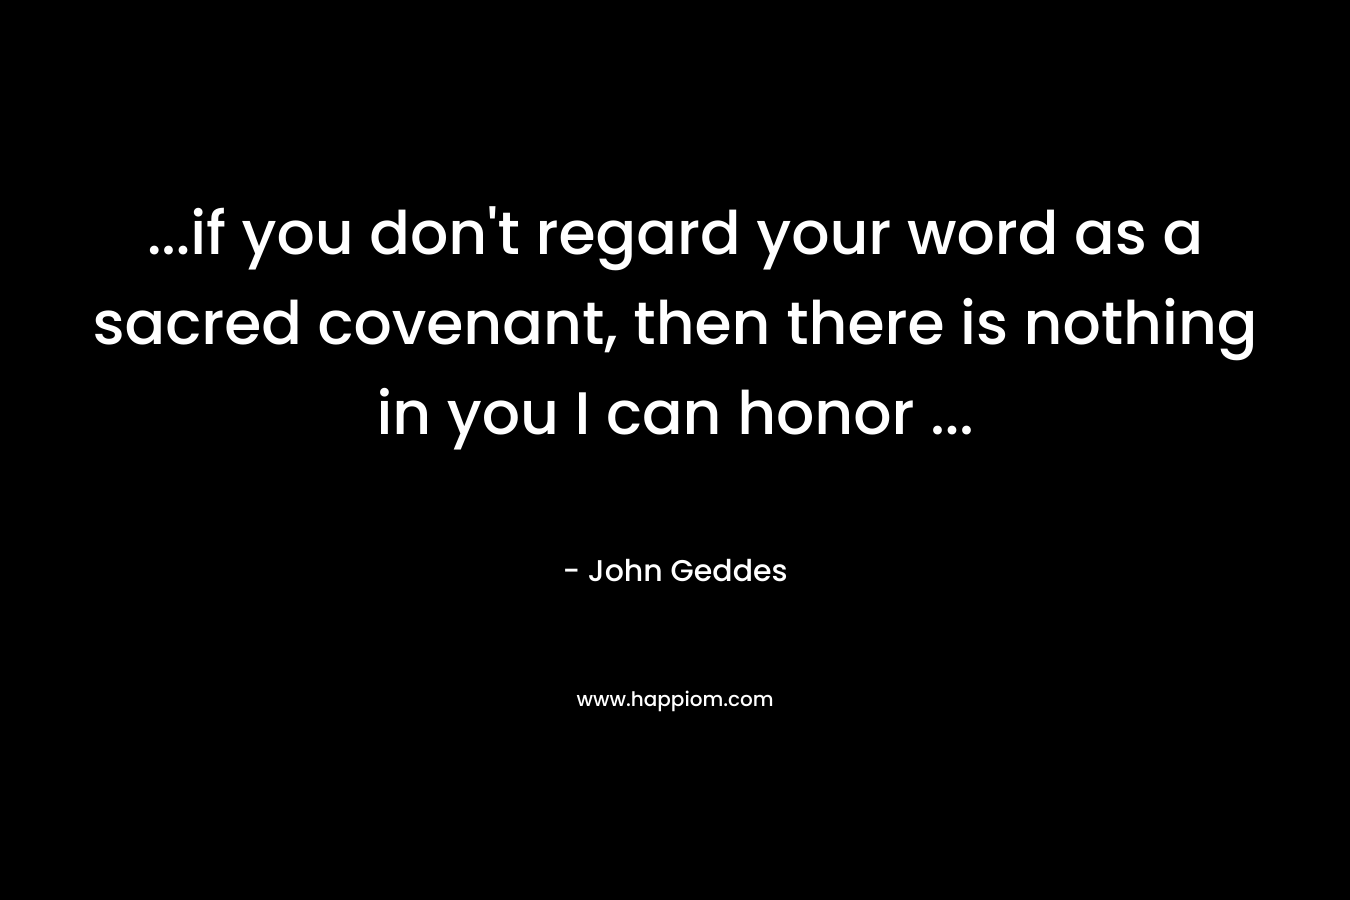 ...if you don't regard your word as a sacred covenant, then there is nothing in you I can honor ...